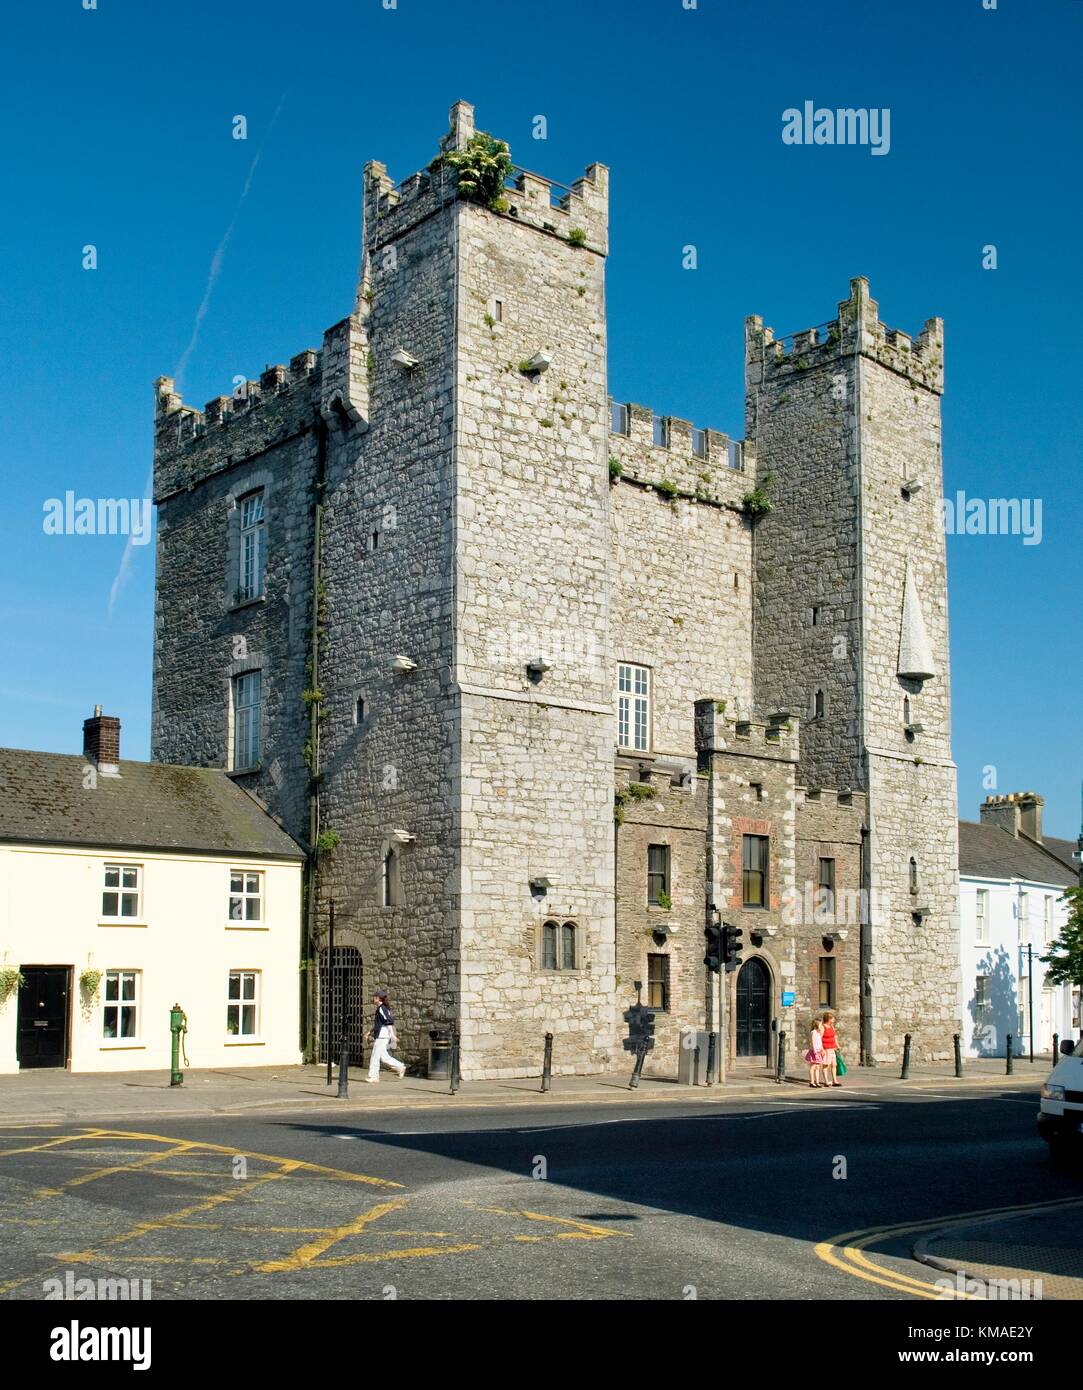 13th C. Anglo-Norman Ardee castle in the main street of the small County Louth town of Ardee, Ireland. Stock Photo